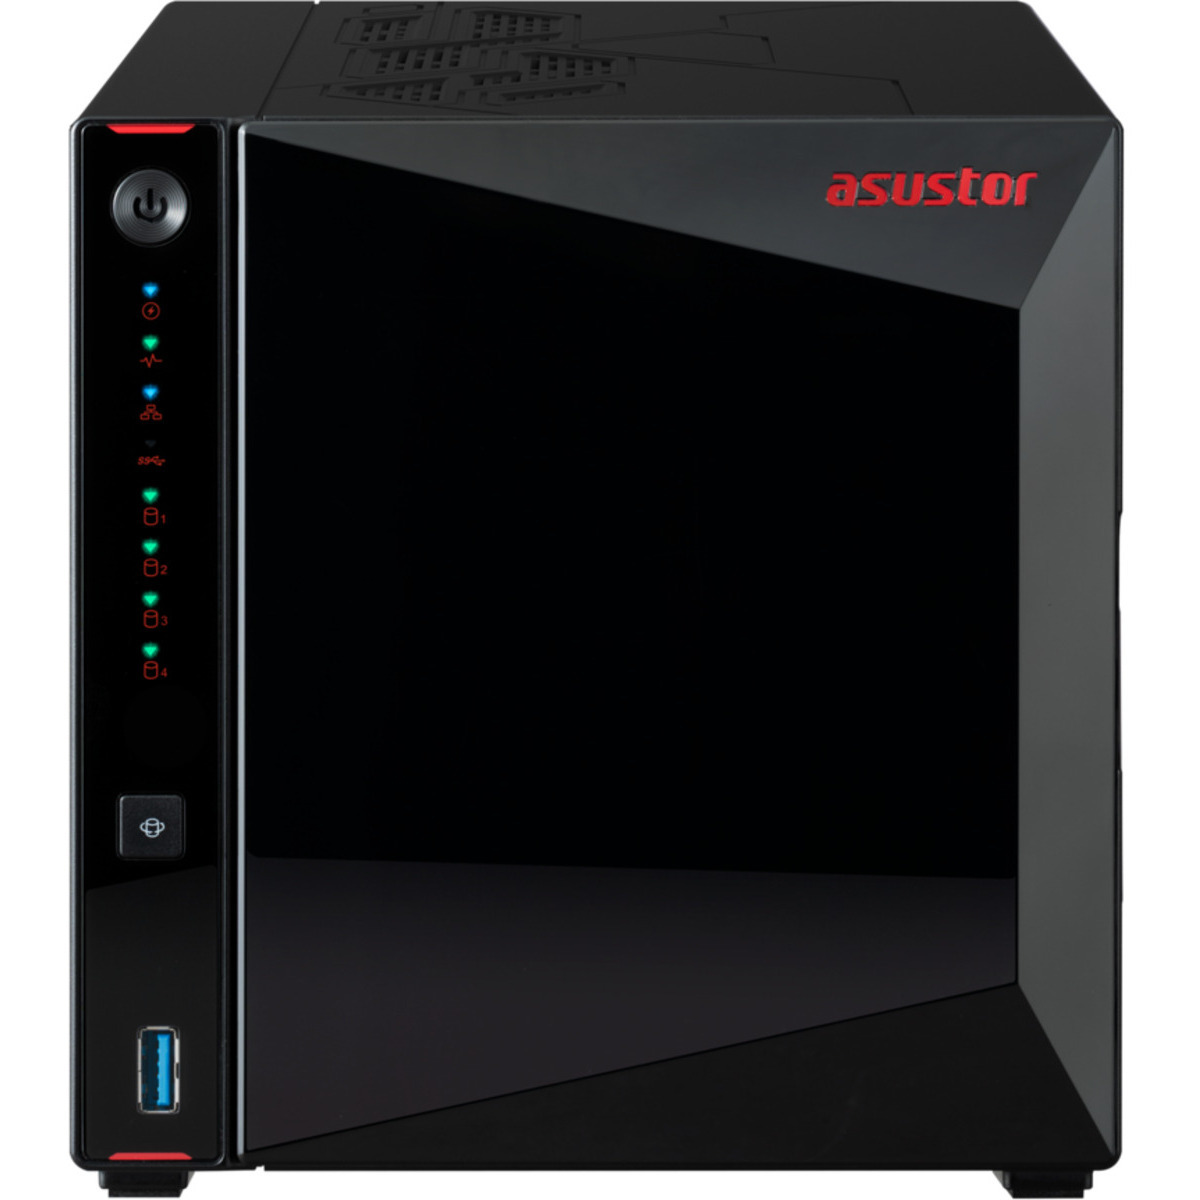 buy ASUSTOR Nimbustor 4 Gen2 AS5404T 96tb Desktop NAS - Network Attached Storage Device 4x24000gb Western Digital Ultrastar HC580 WUH722424ALE6L4 3.5 7200rpm SATA 6Gb/s HDD ENTERPRISE Class Drives Installed - Burn-In Tested - ON SALE - FREE RAM UPGRADE - nas headquarters buy network attached storage server device das new raid-5 free shipping simply usa Nimbustor 4 Gen2 AS5404T